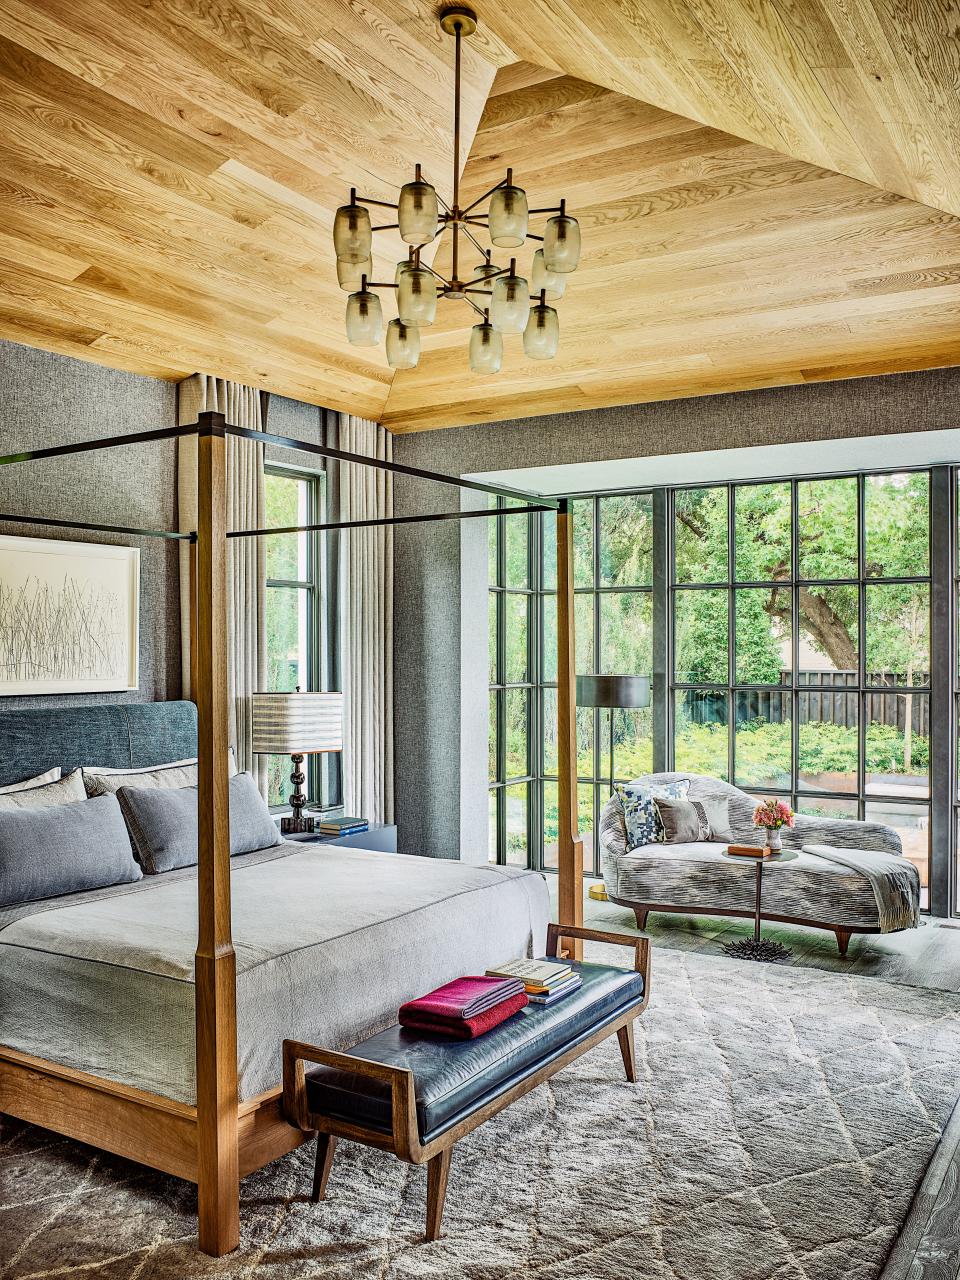 The master bedroom is furnished with a Holly Hunt bed and a bench and lighting by Arteriors.